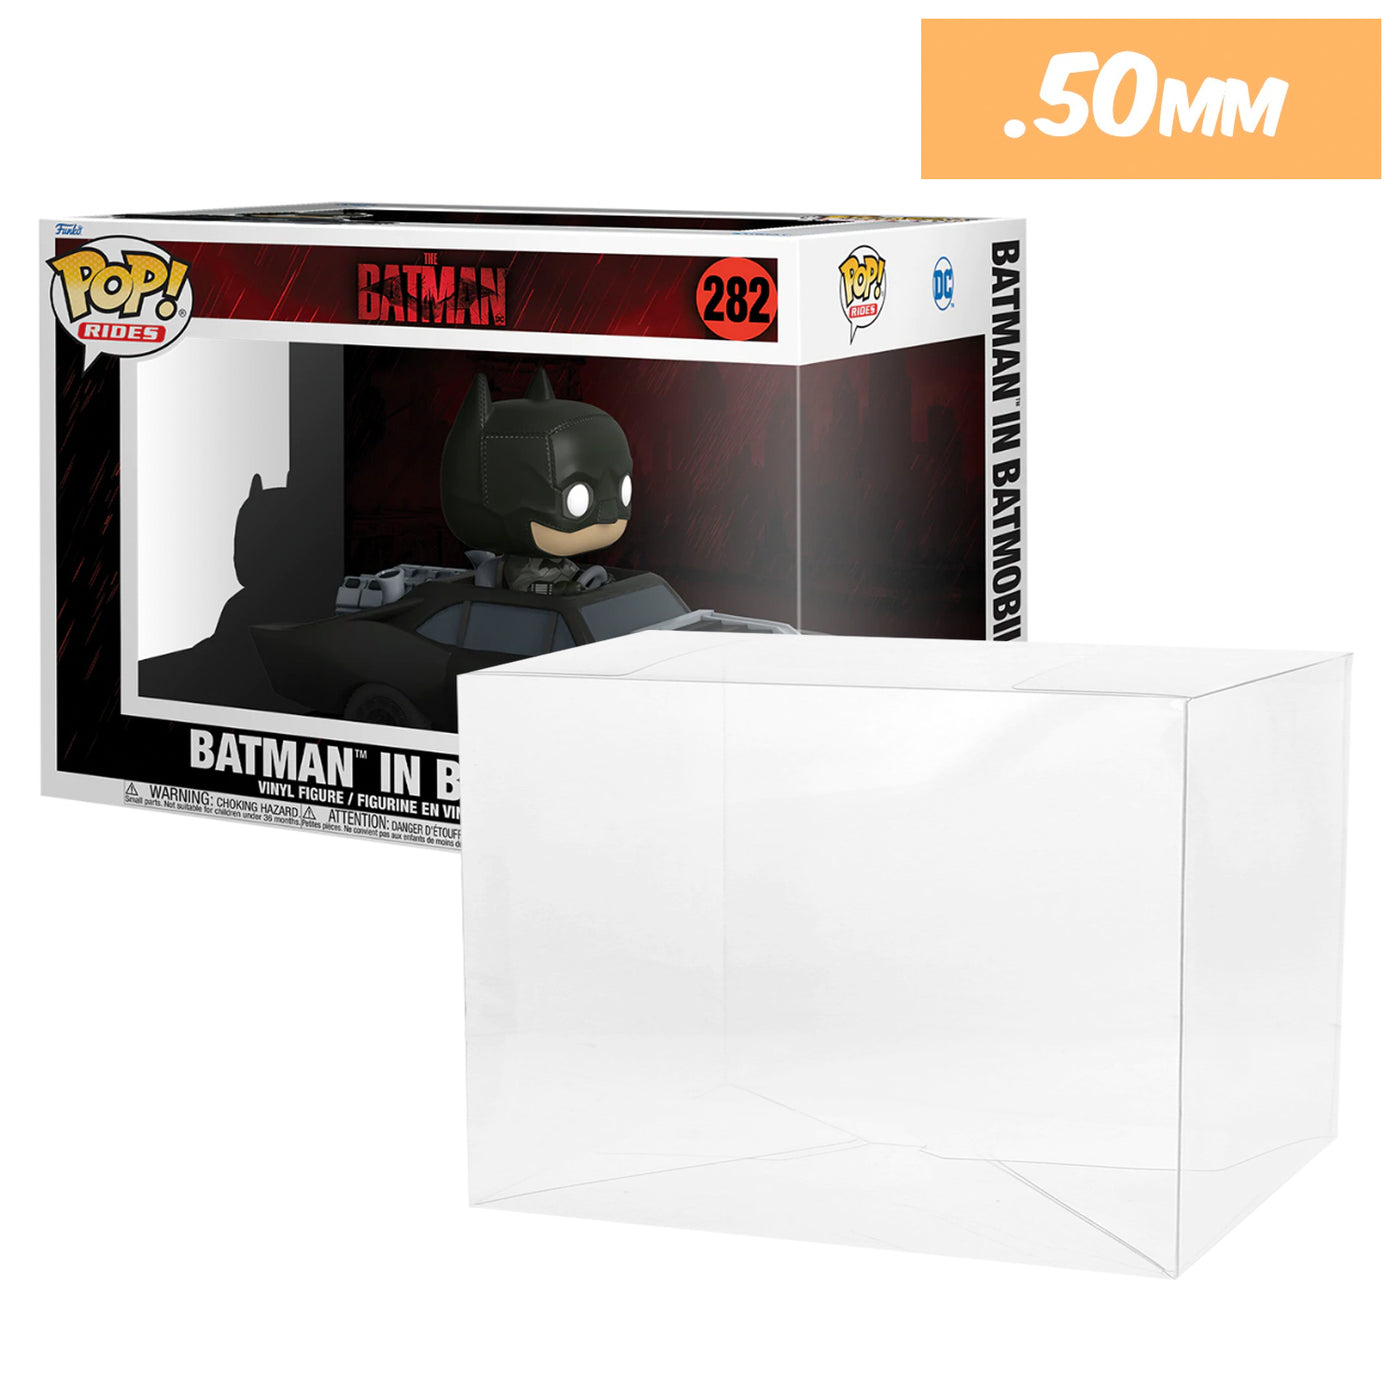 The Batman Batmobile pop rides best funko pop protectors thick strong uv scratch flat top stack vinyl display geek plastic shield vaulted eco armor fits collect protect display case kollector protector